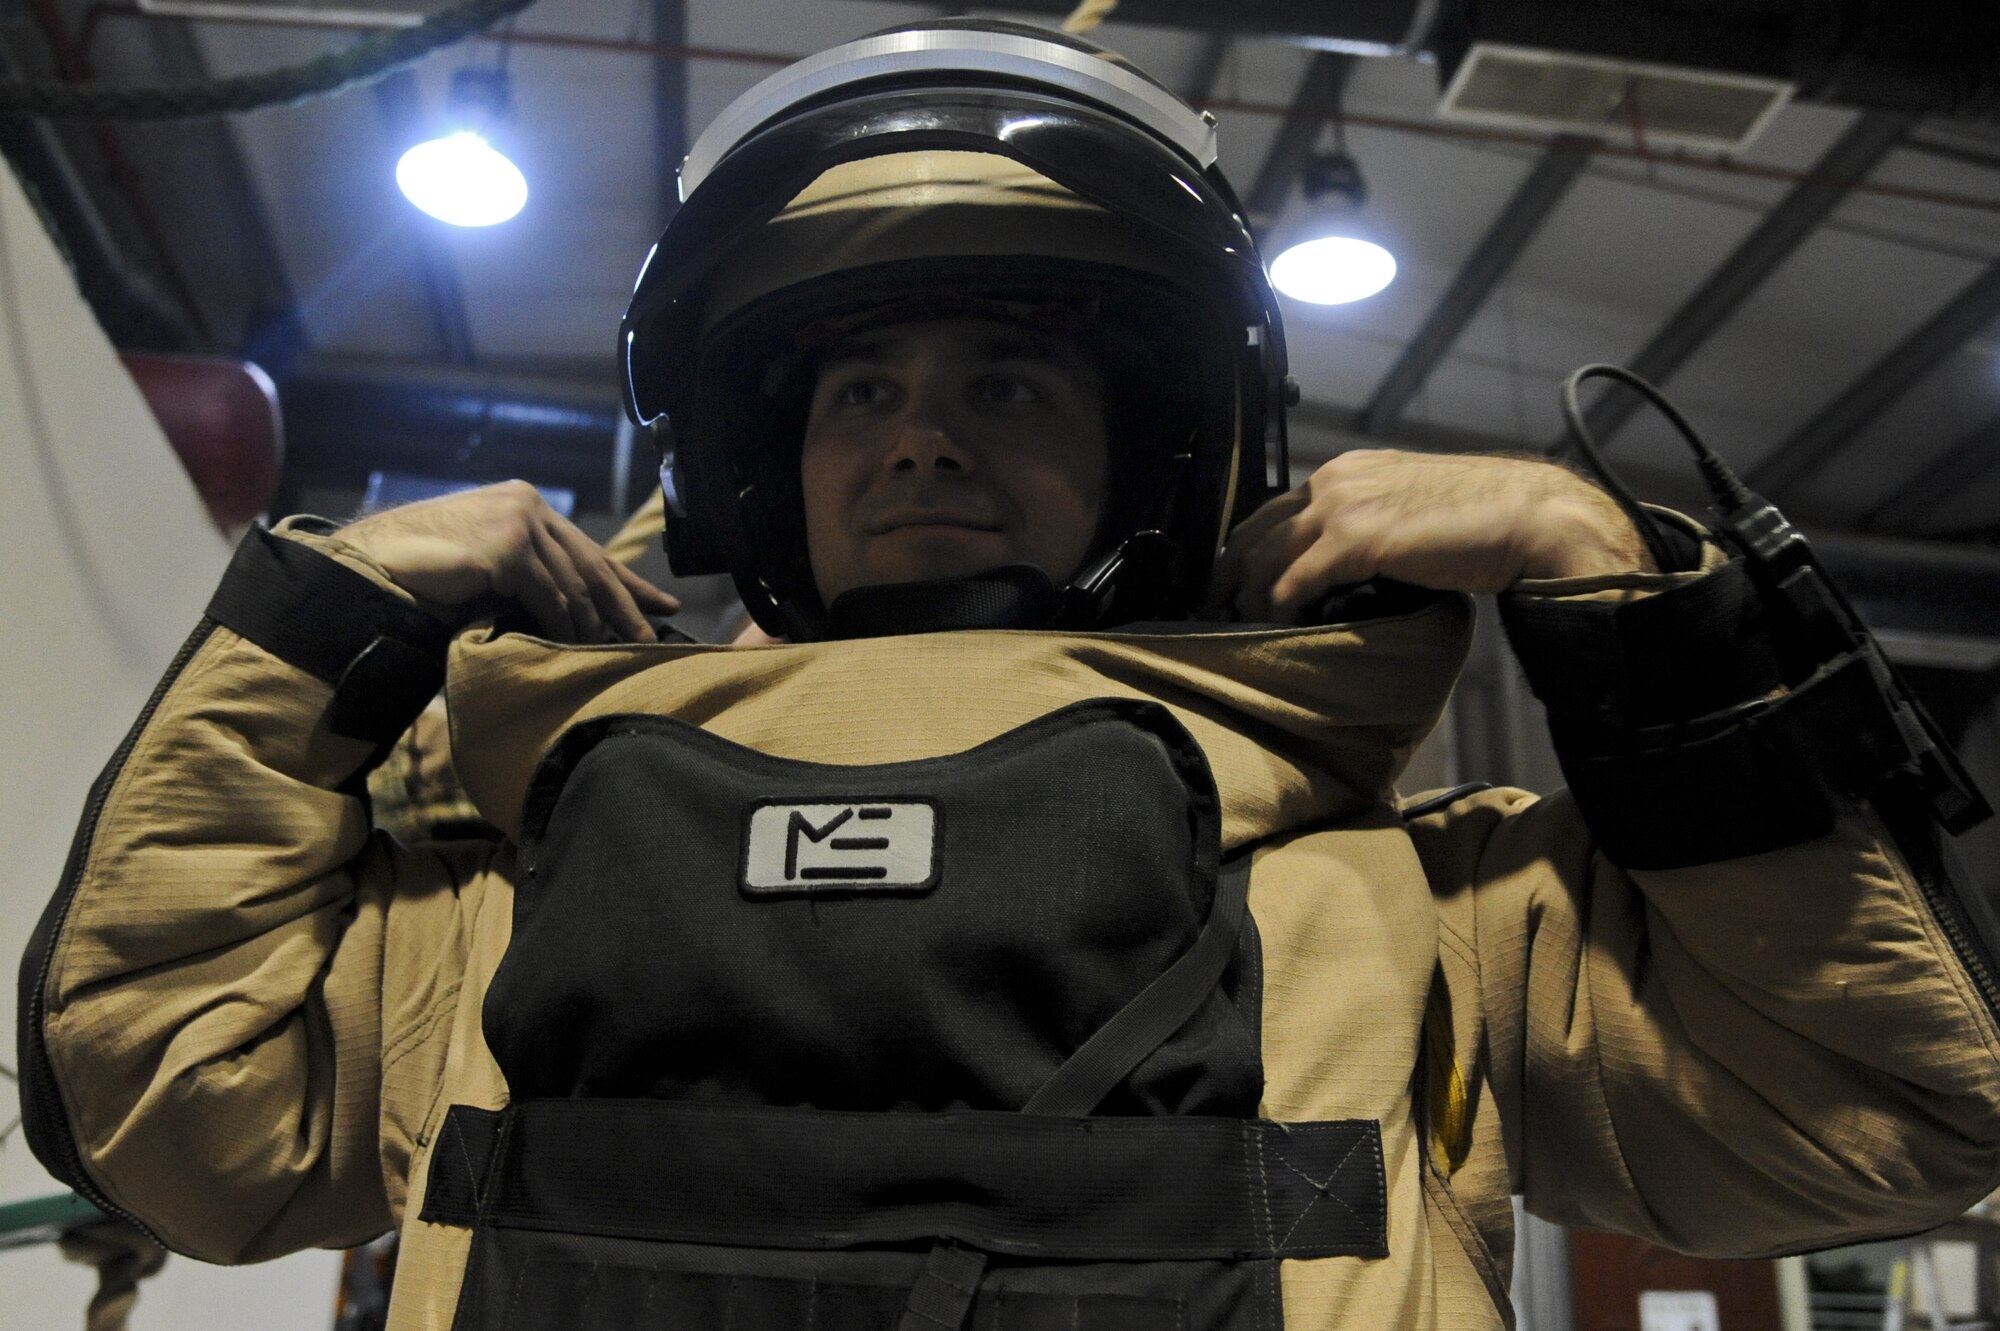 U.S. Air Force Staff Sgt. Andrew Roberts, 380th Expeditionary Civil Engineer Squadron explosive ordnance disposal technician, puts on a bomb suit at an undisclosed location in Southwest Asia July 25, 2013. Roberts was getting ready for a training mission to find and disable a training improvised explosive device. Roberts calls Blanchard, Idaho, home and is deployed from Fairchild Air Force Base, Wash. (U.S. Air Force photo by Senior Airman Jacob Morgan)